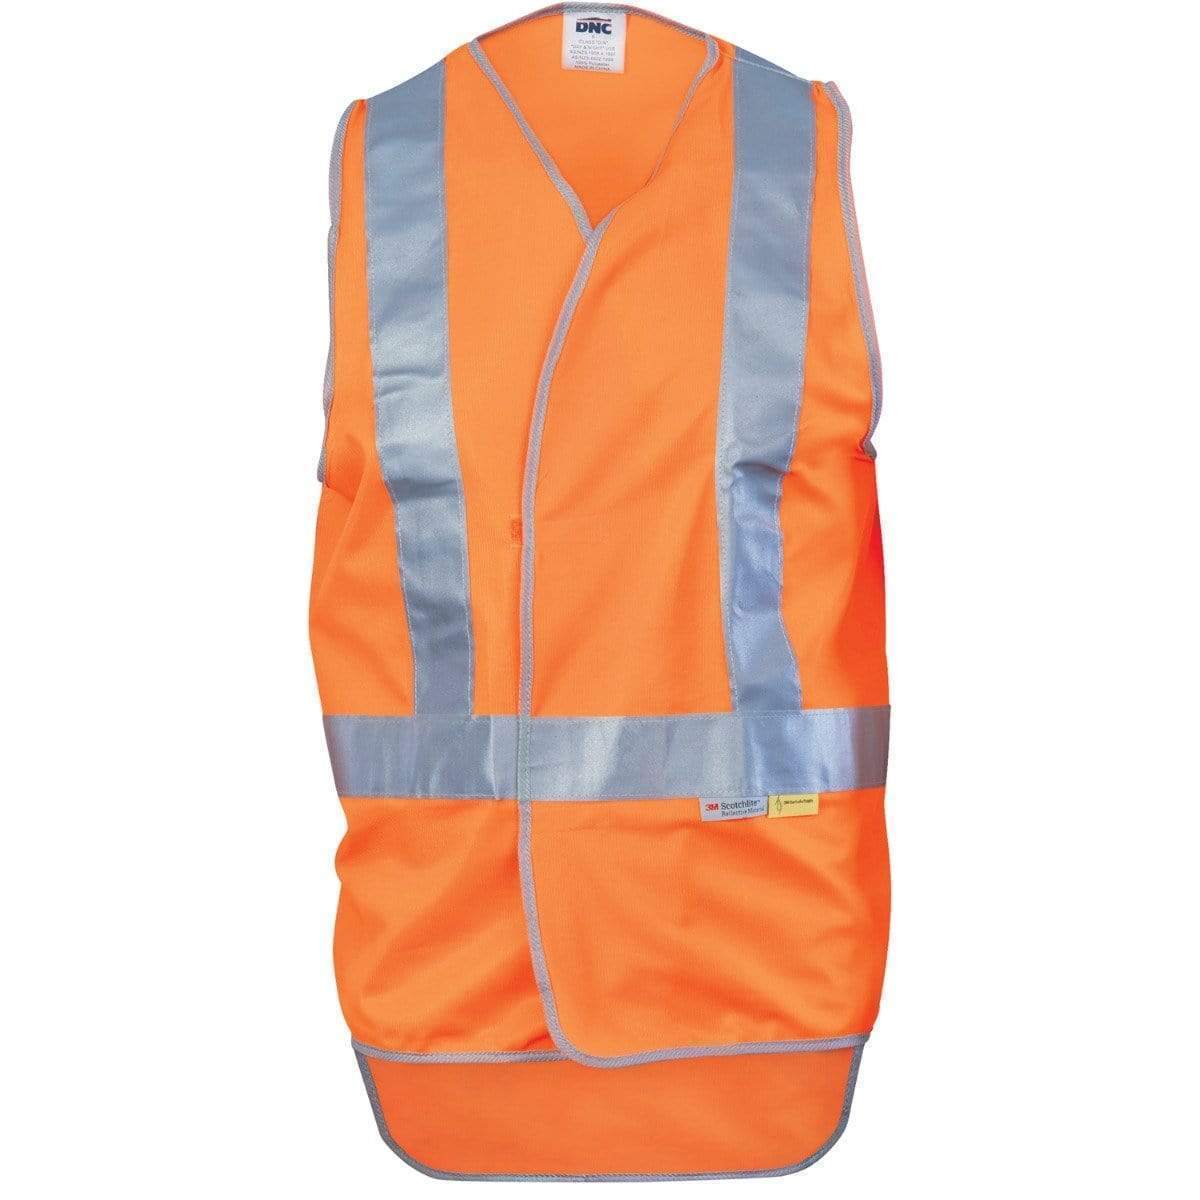 DNC Workwear Work Wear DNC WORKWEAR Day/Night Cross Back Safety Vest with Tail 3802